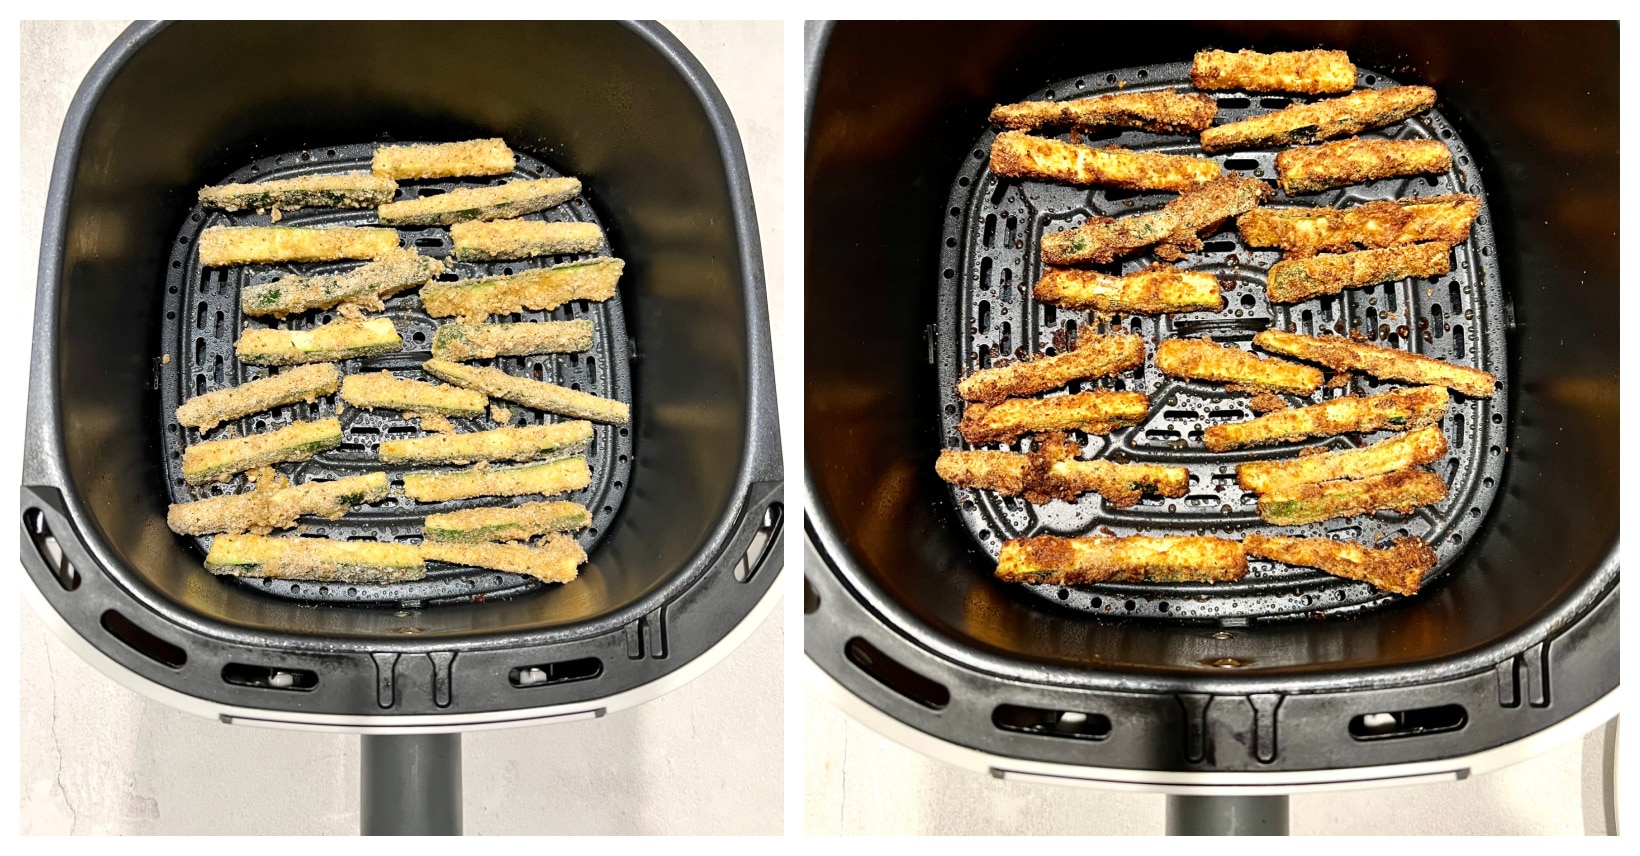 zucchini fries in air fryer basket, steps 5 and 6